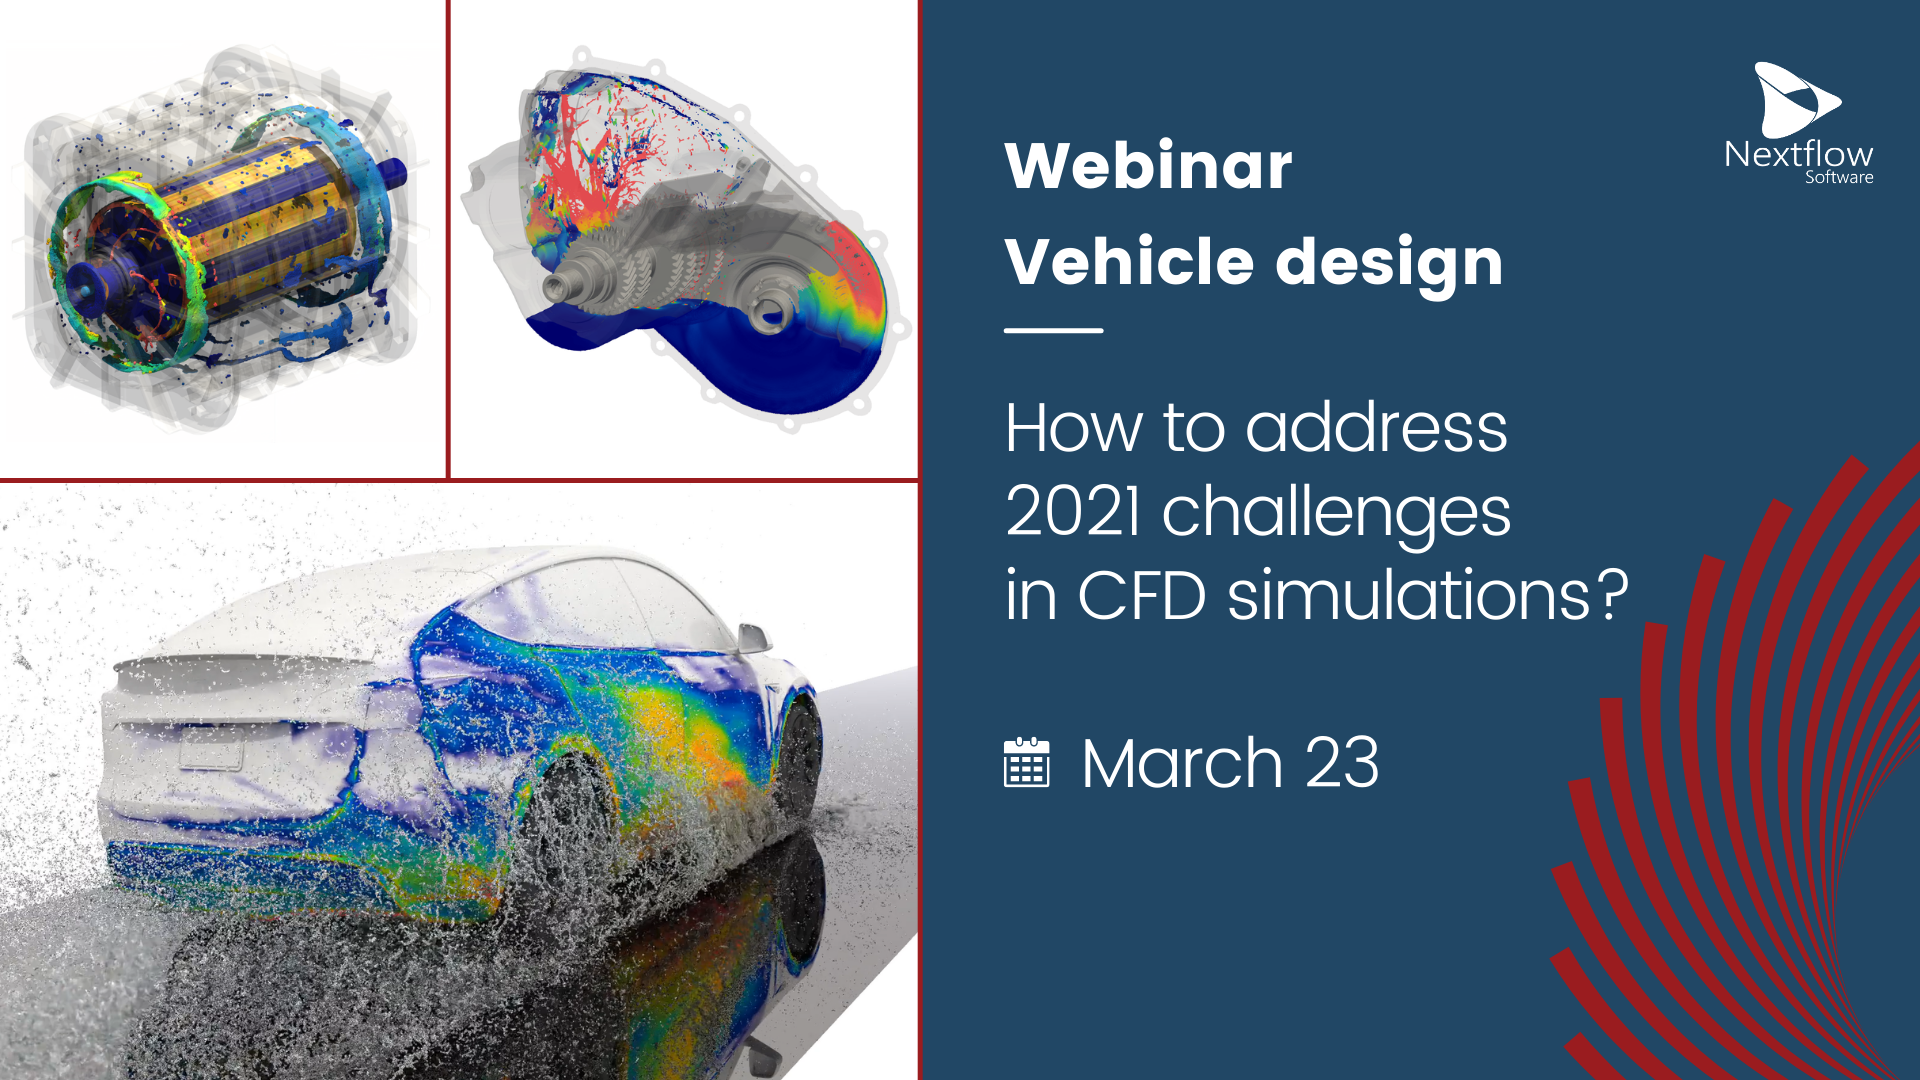 Webinar | Vehicle design: how to address 2021 challenges in CFD simulations?